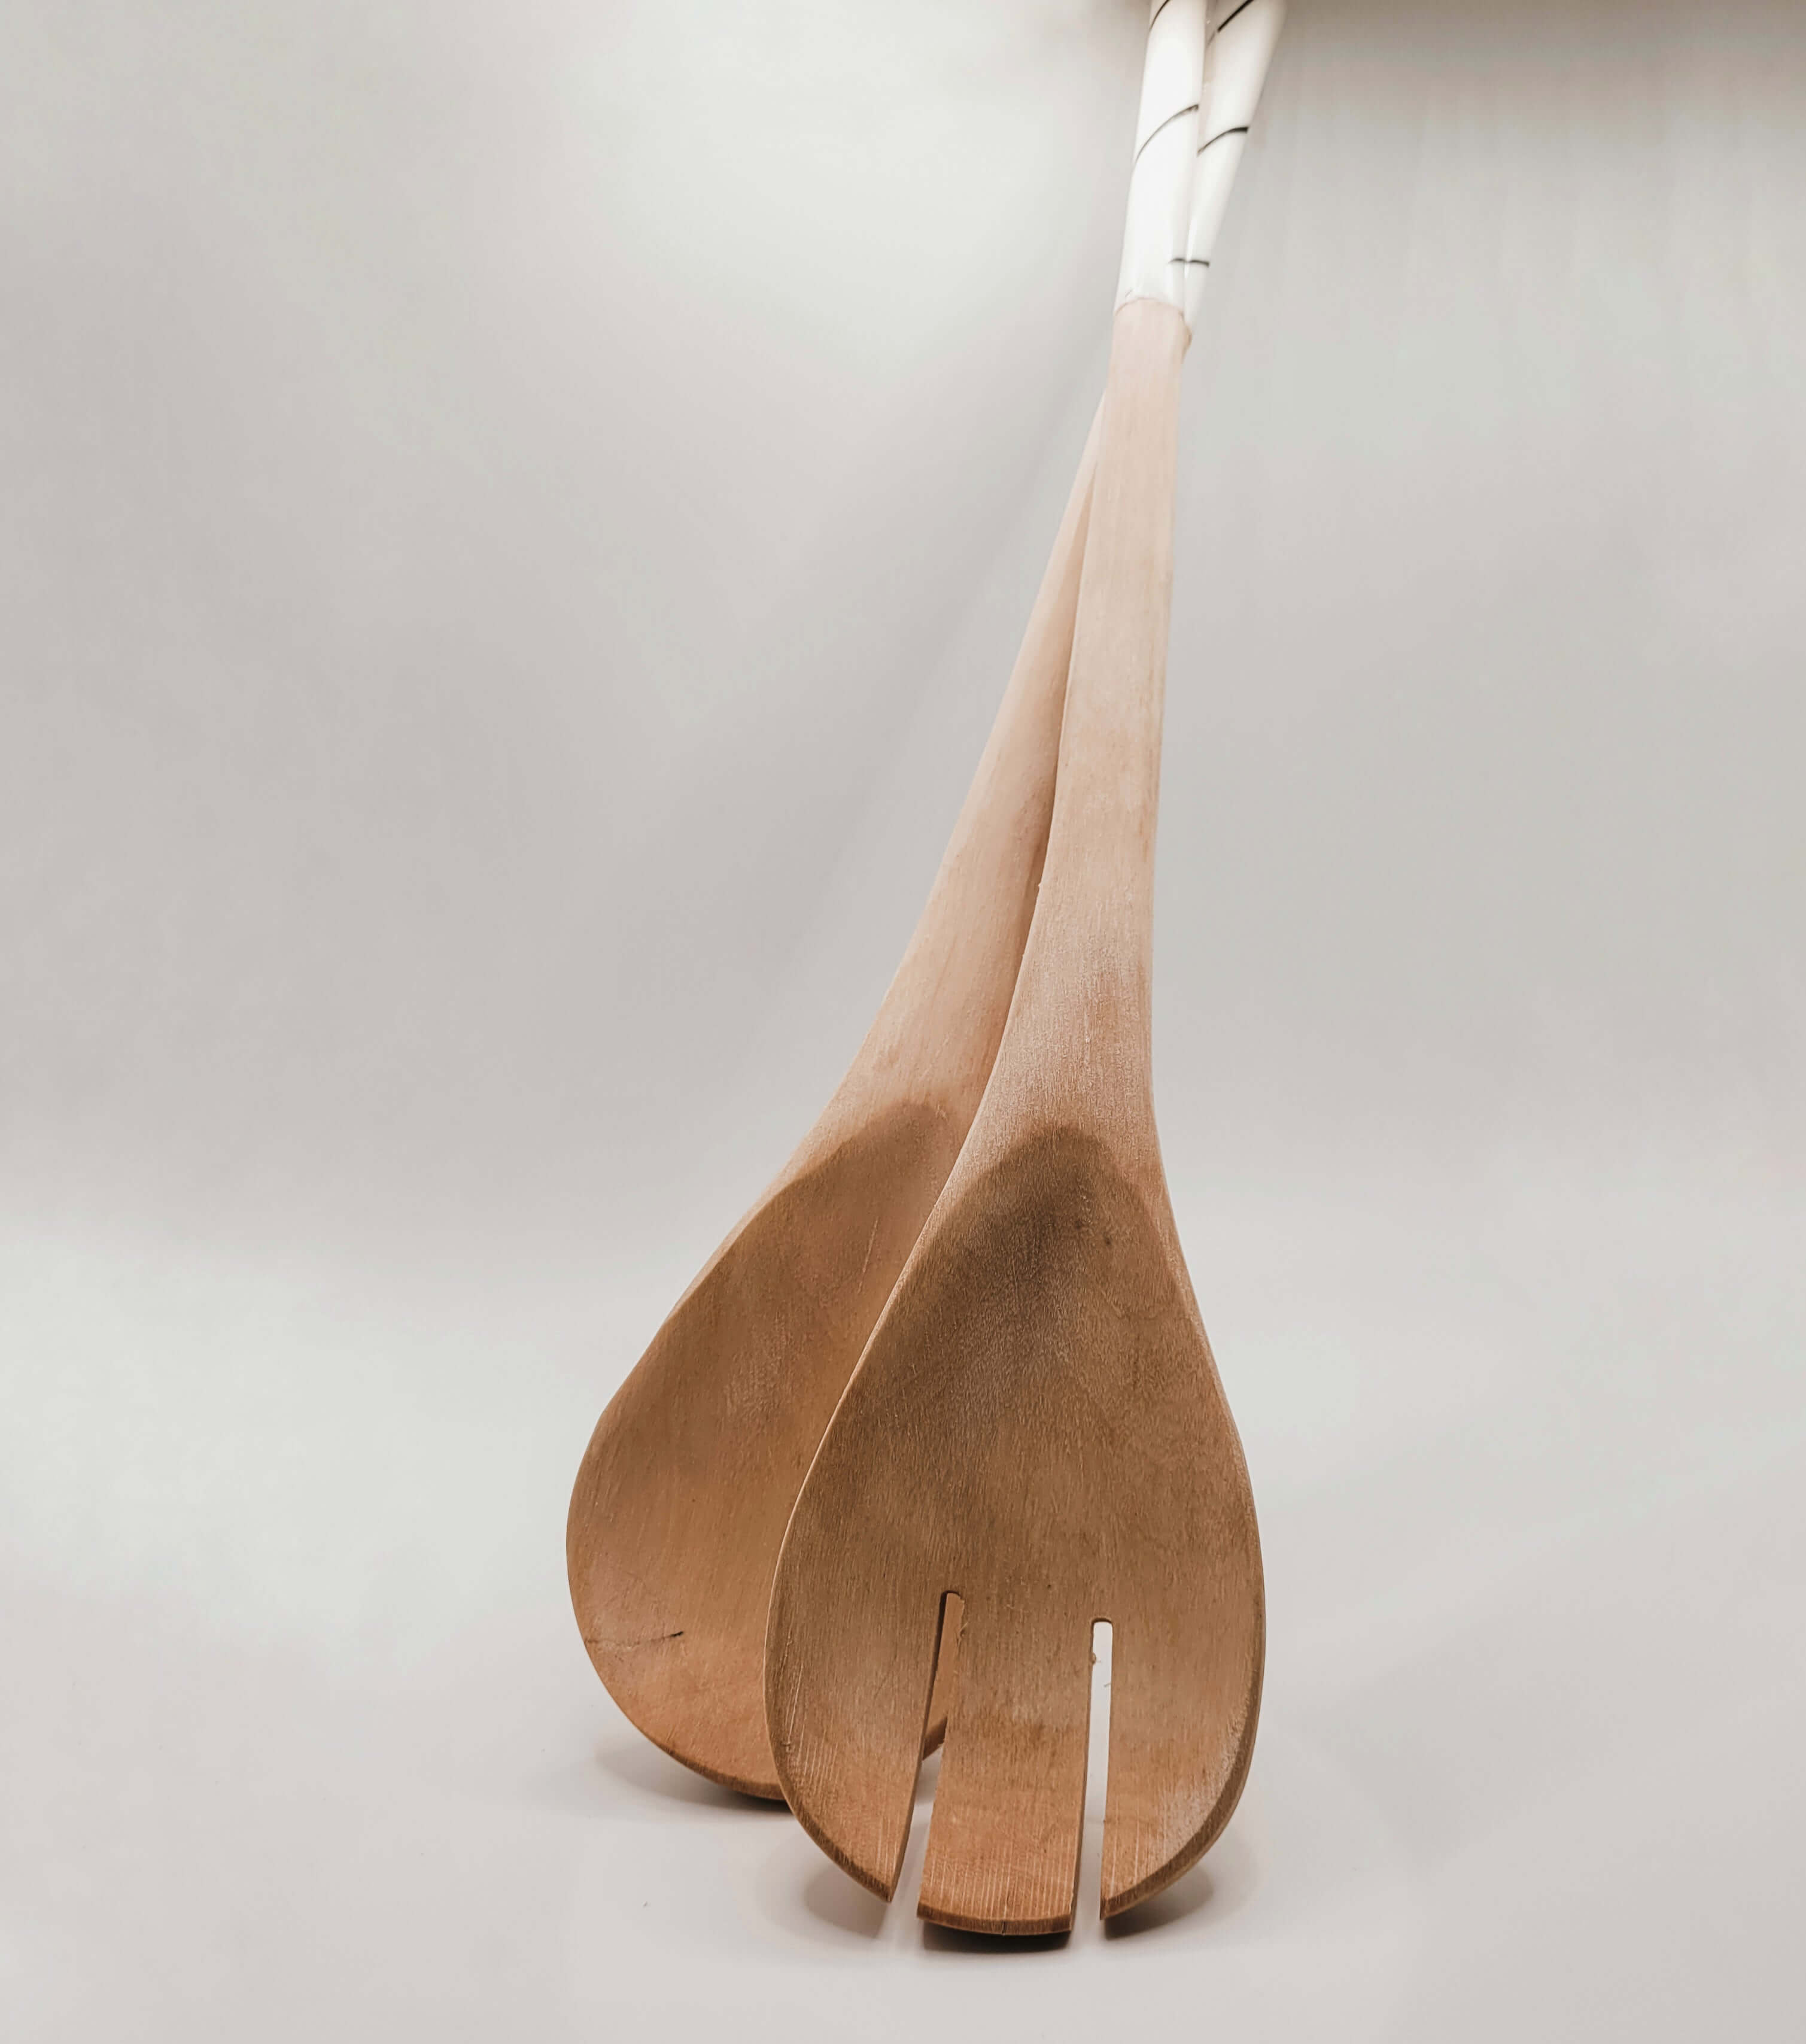 African Olive Wood Salad Servers on white background